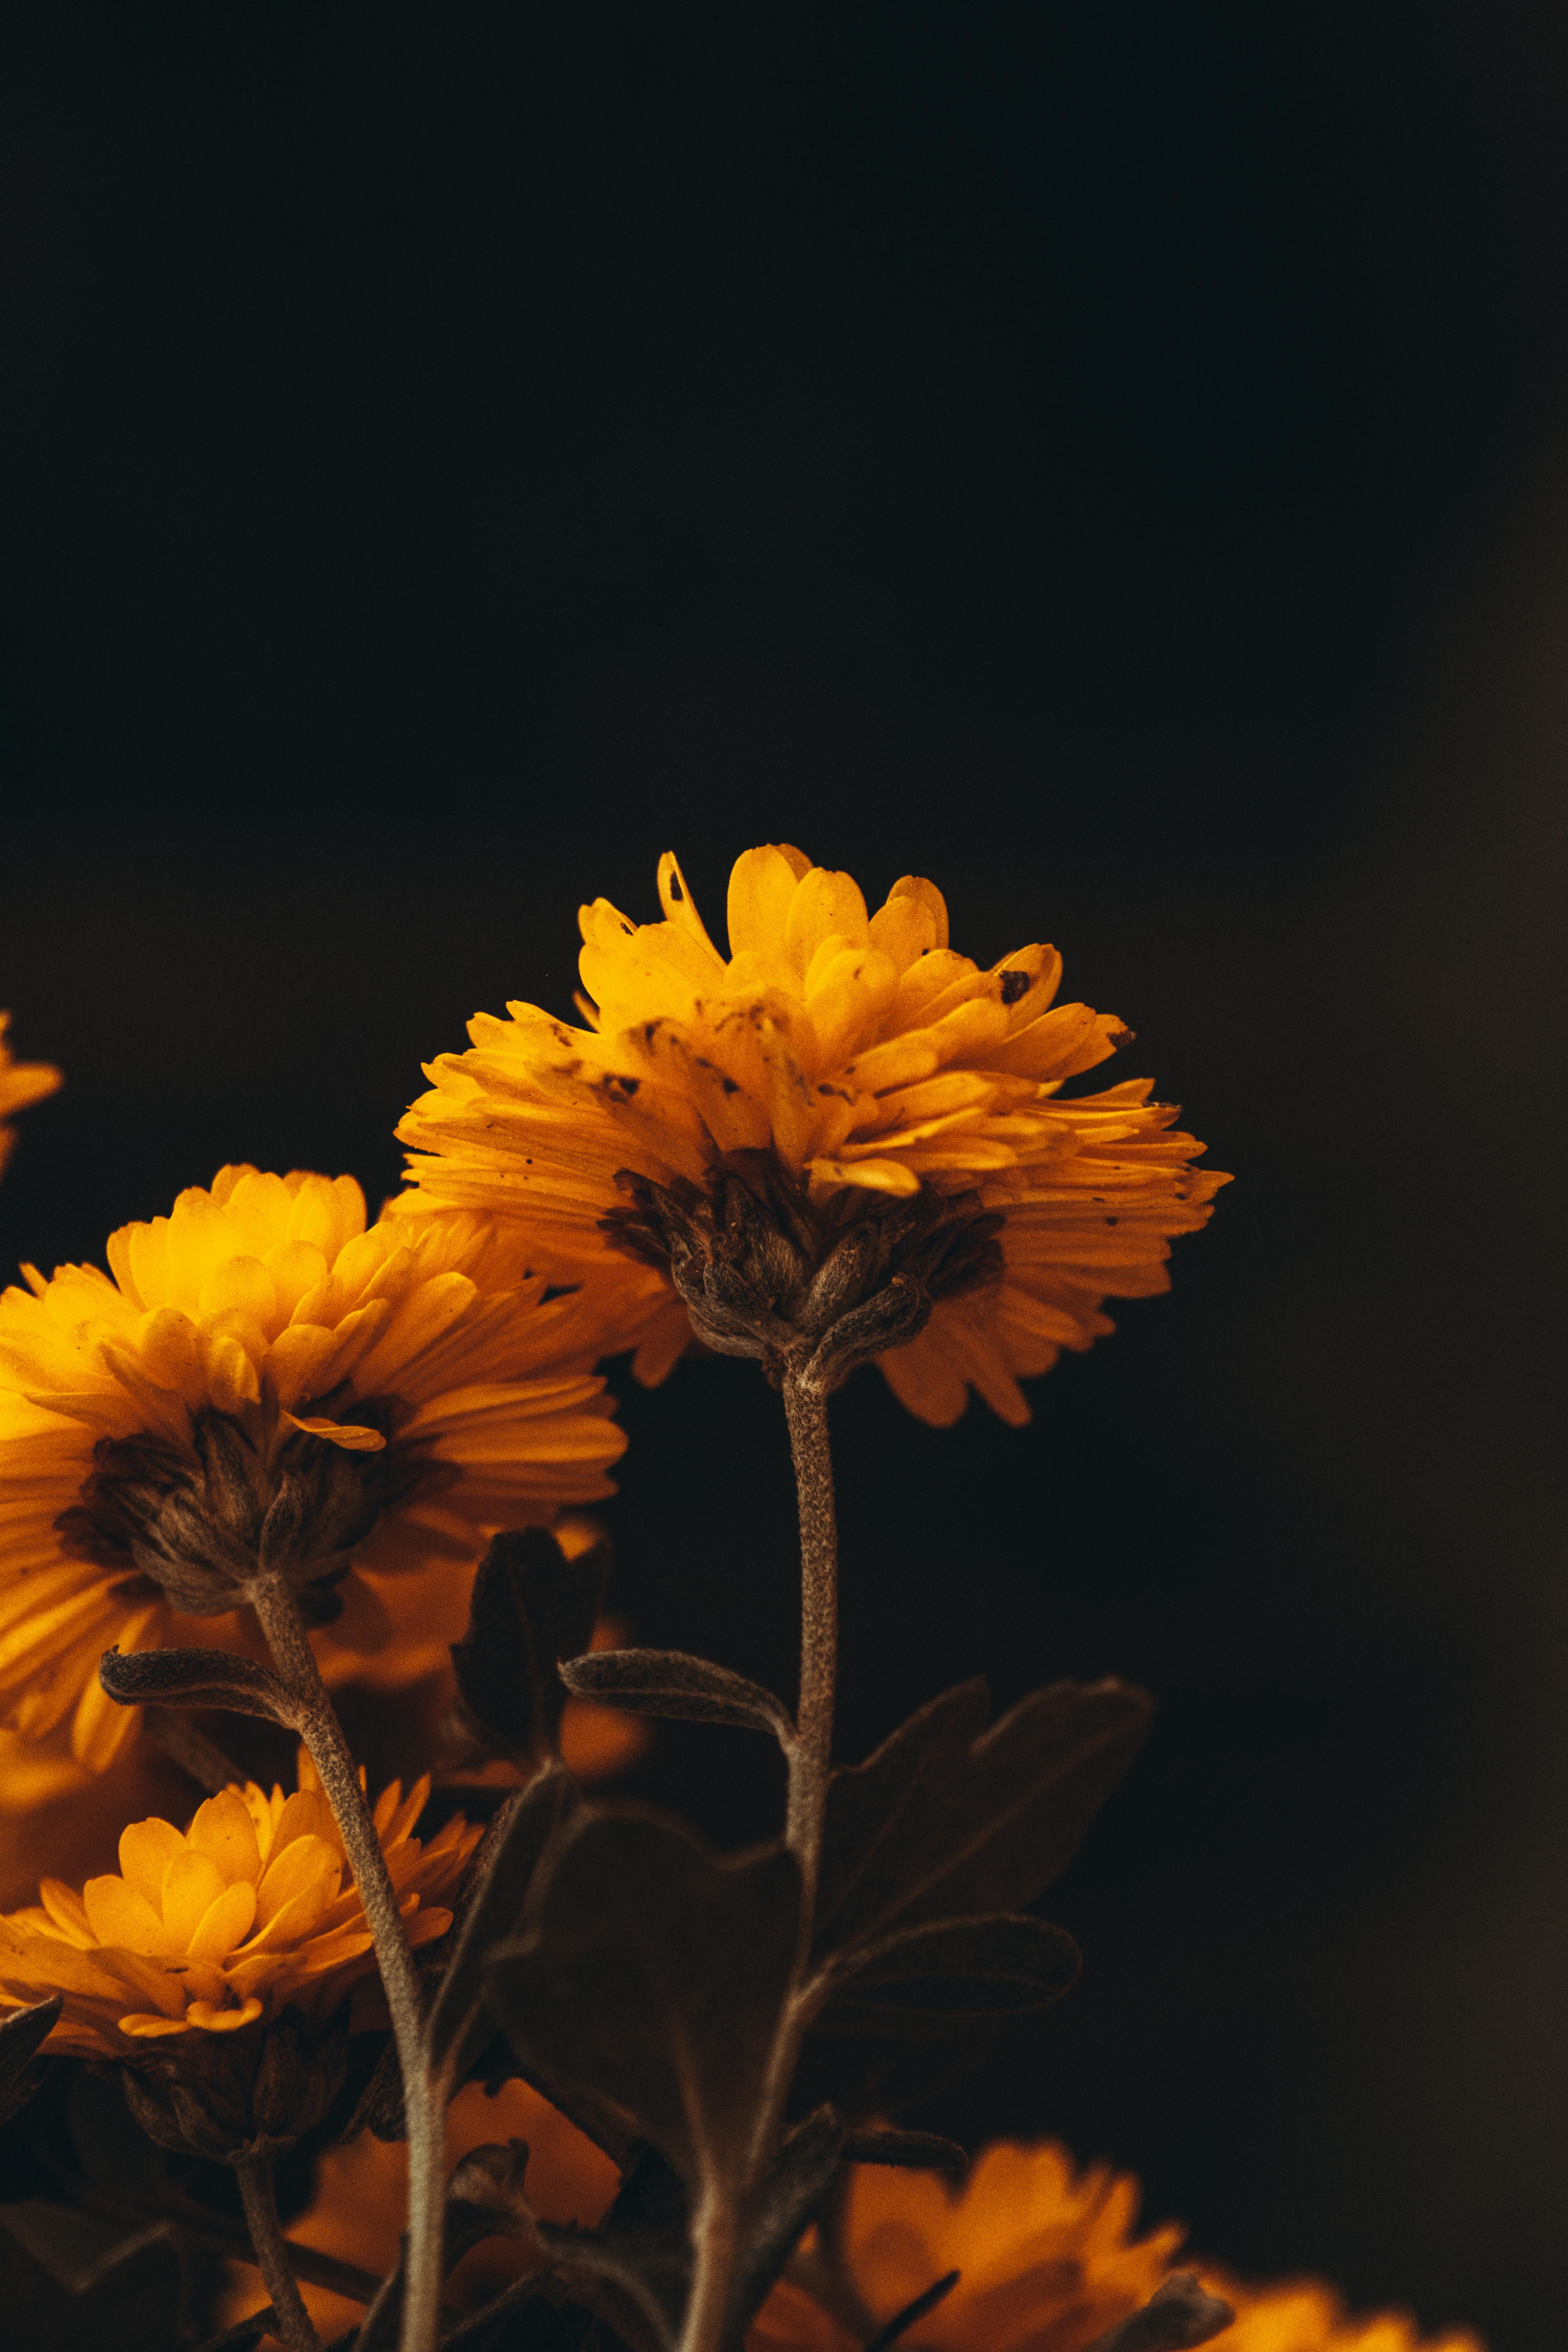 A Beautiful Yellow Flowers with Dark Background · Free Stock Photo